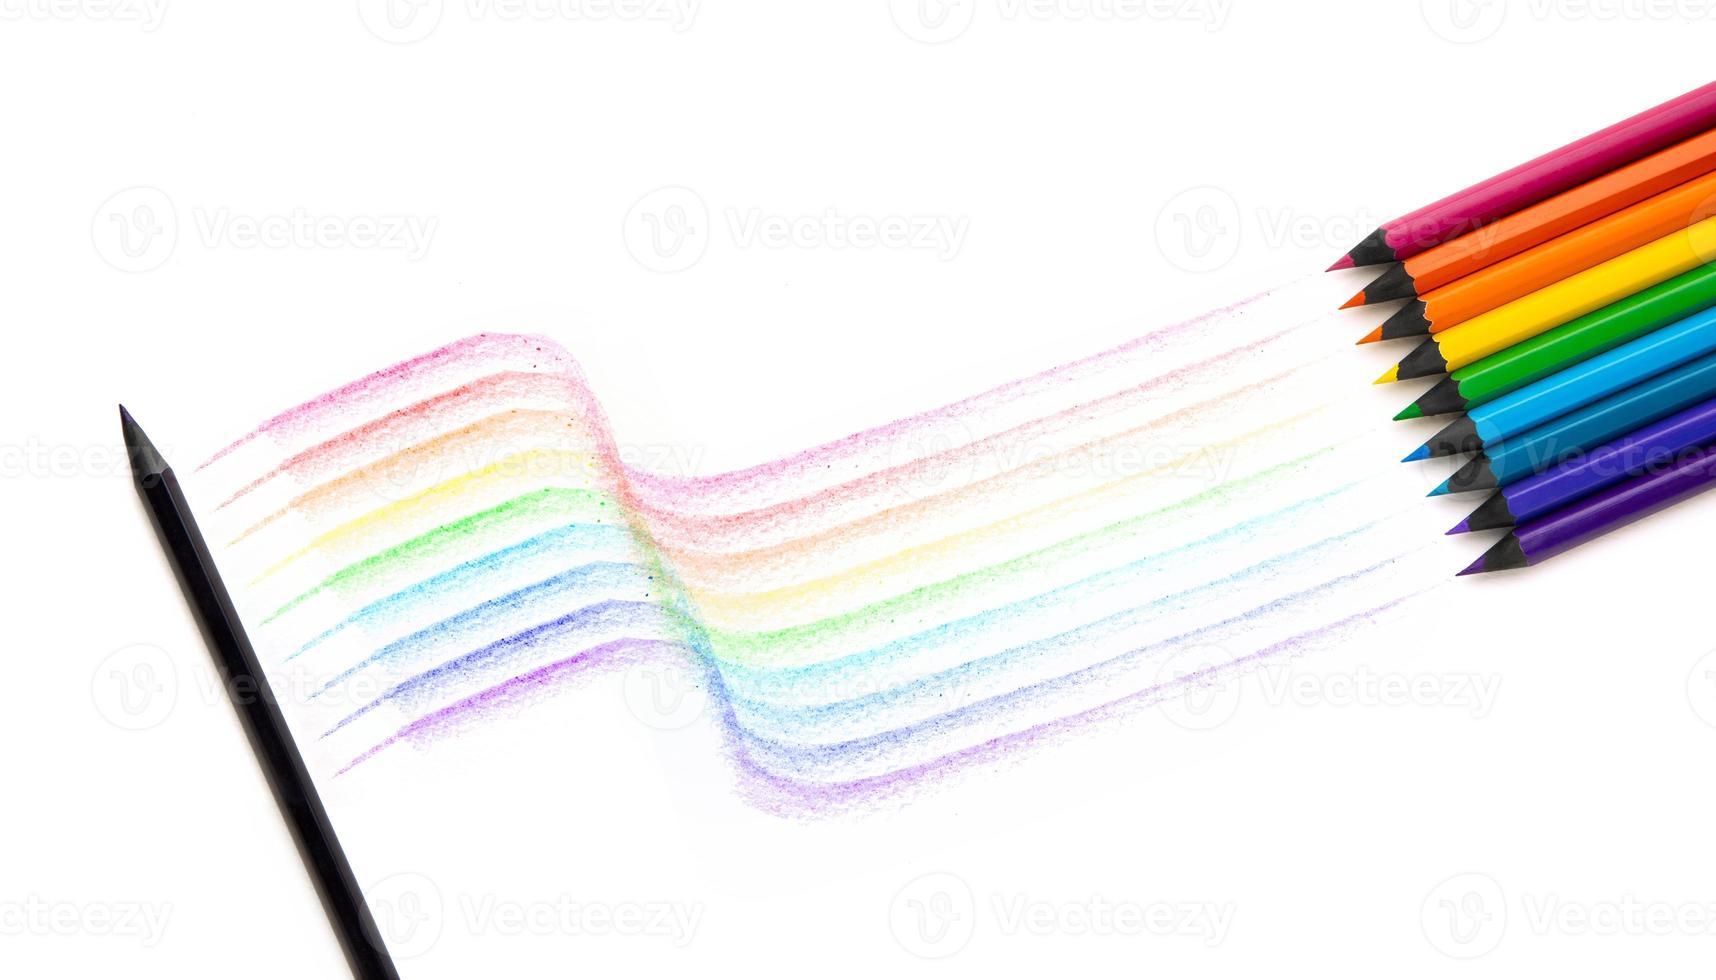 LGBTQ Concepts. Rainbow Flag created by Colour Pencil. Pride month. Sign of Gender, Human Rights and Protest. Symbol of LGBTQ People act Together as Community or Unity. photo